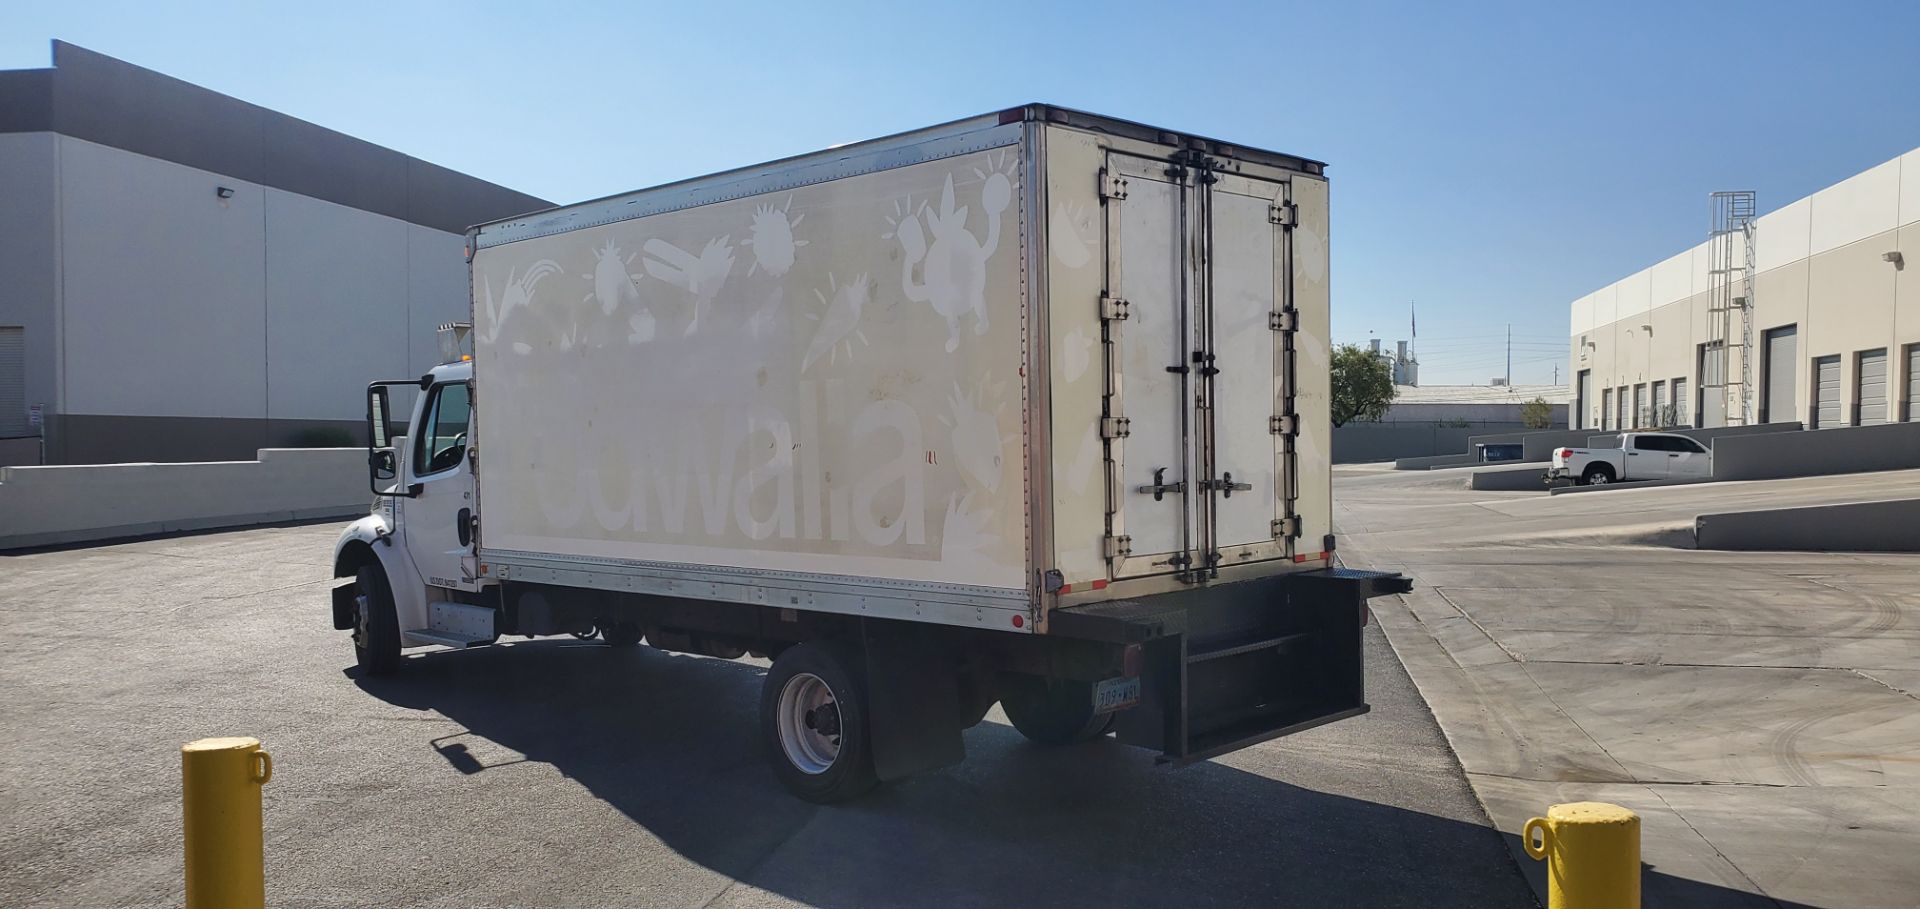 2005 Freightliner refrigerated truck - Image 3 of 11